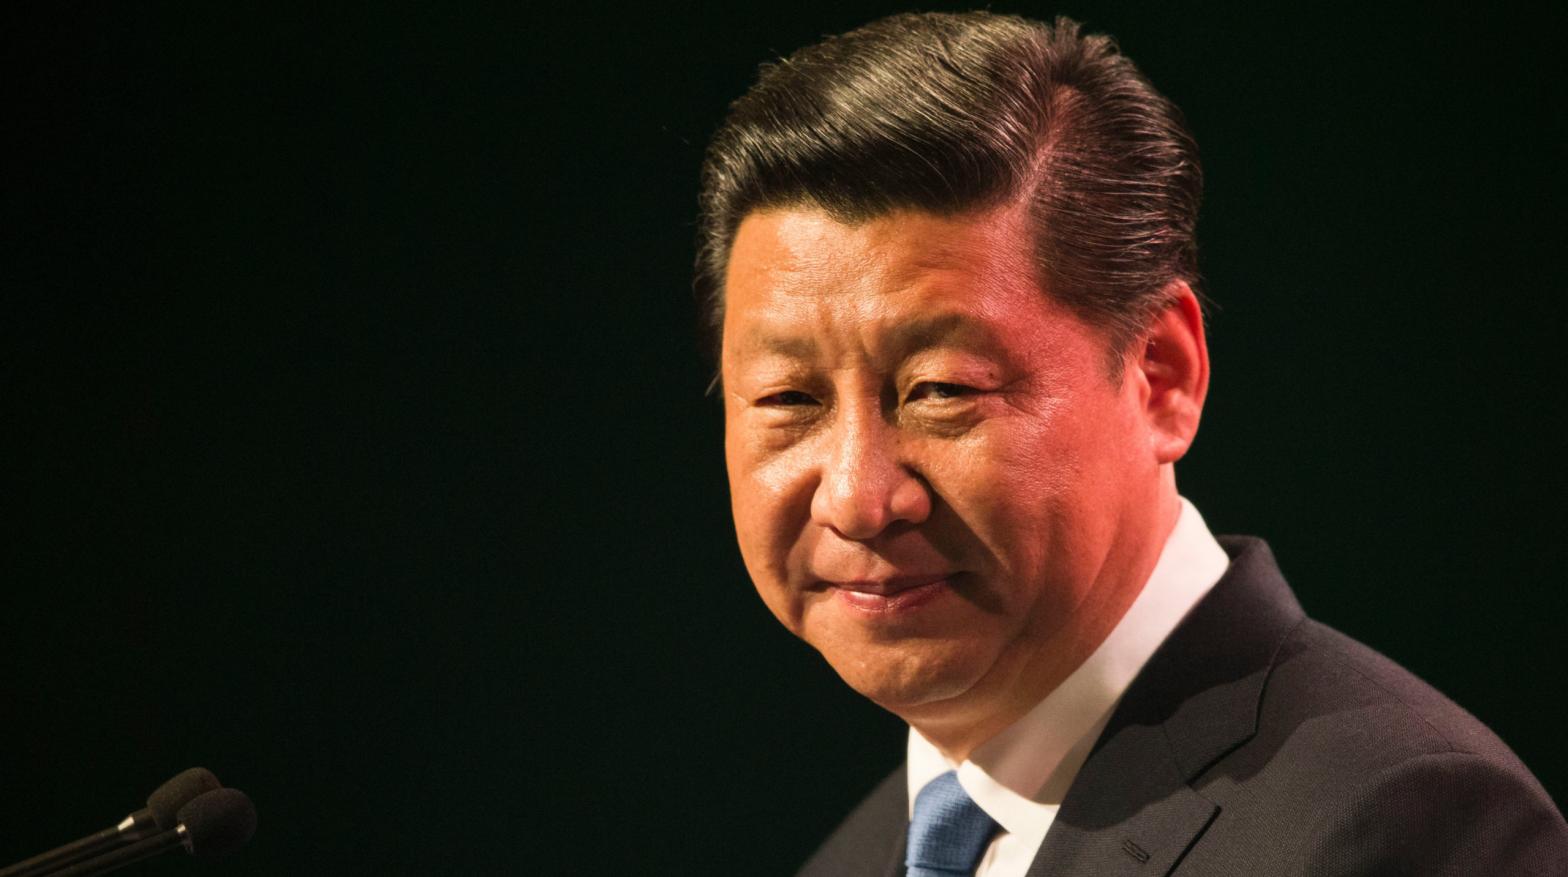 Chinese President Xi Jinping. (Photo: Greg Bowker, Getty Images)